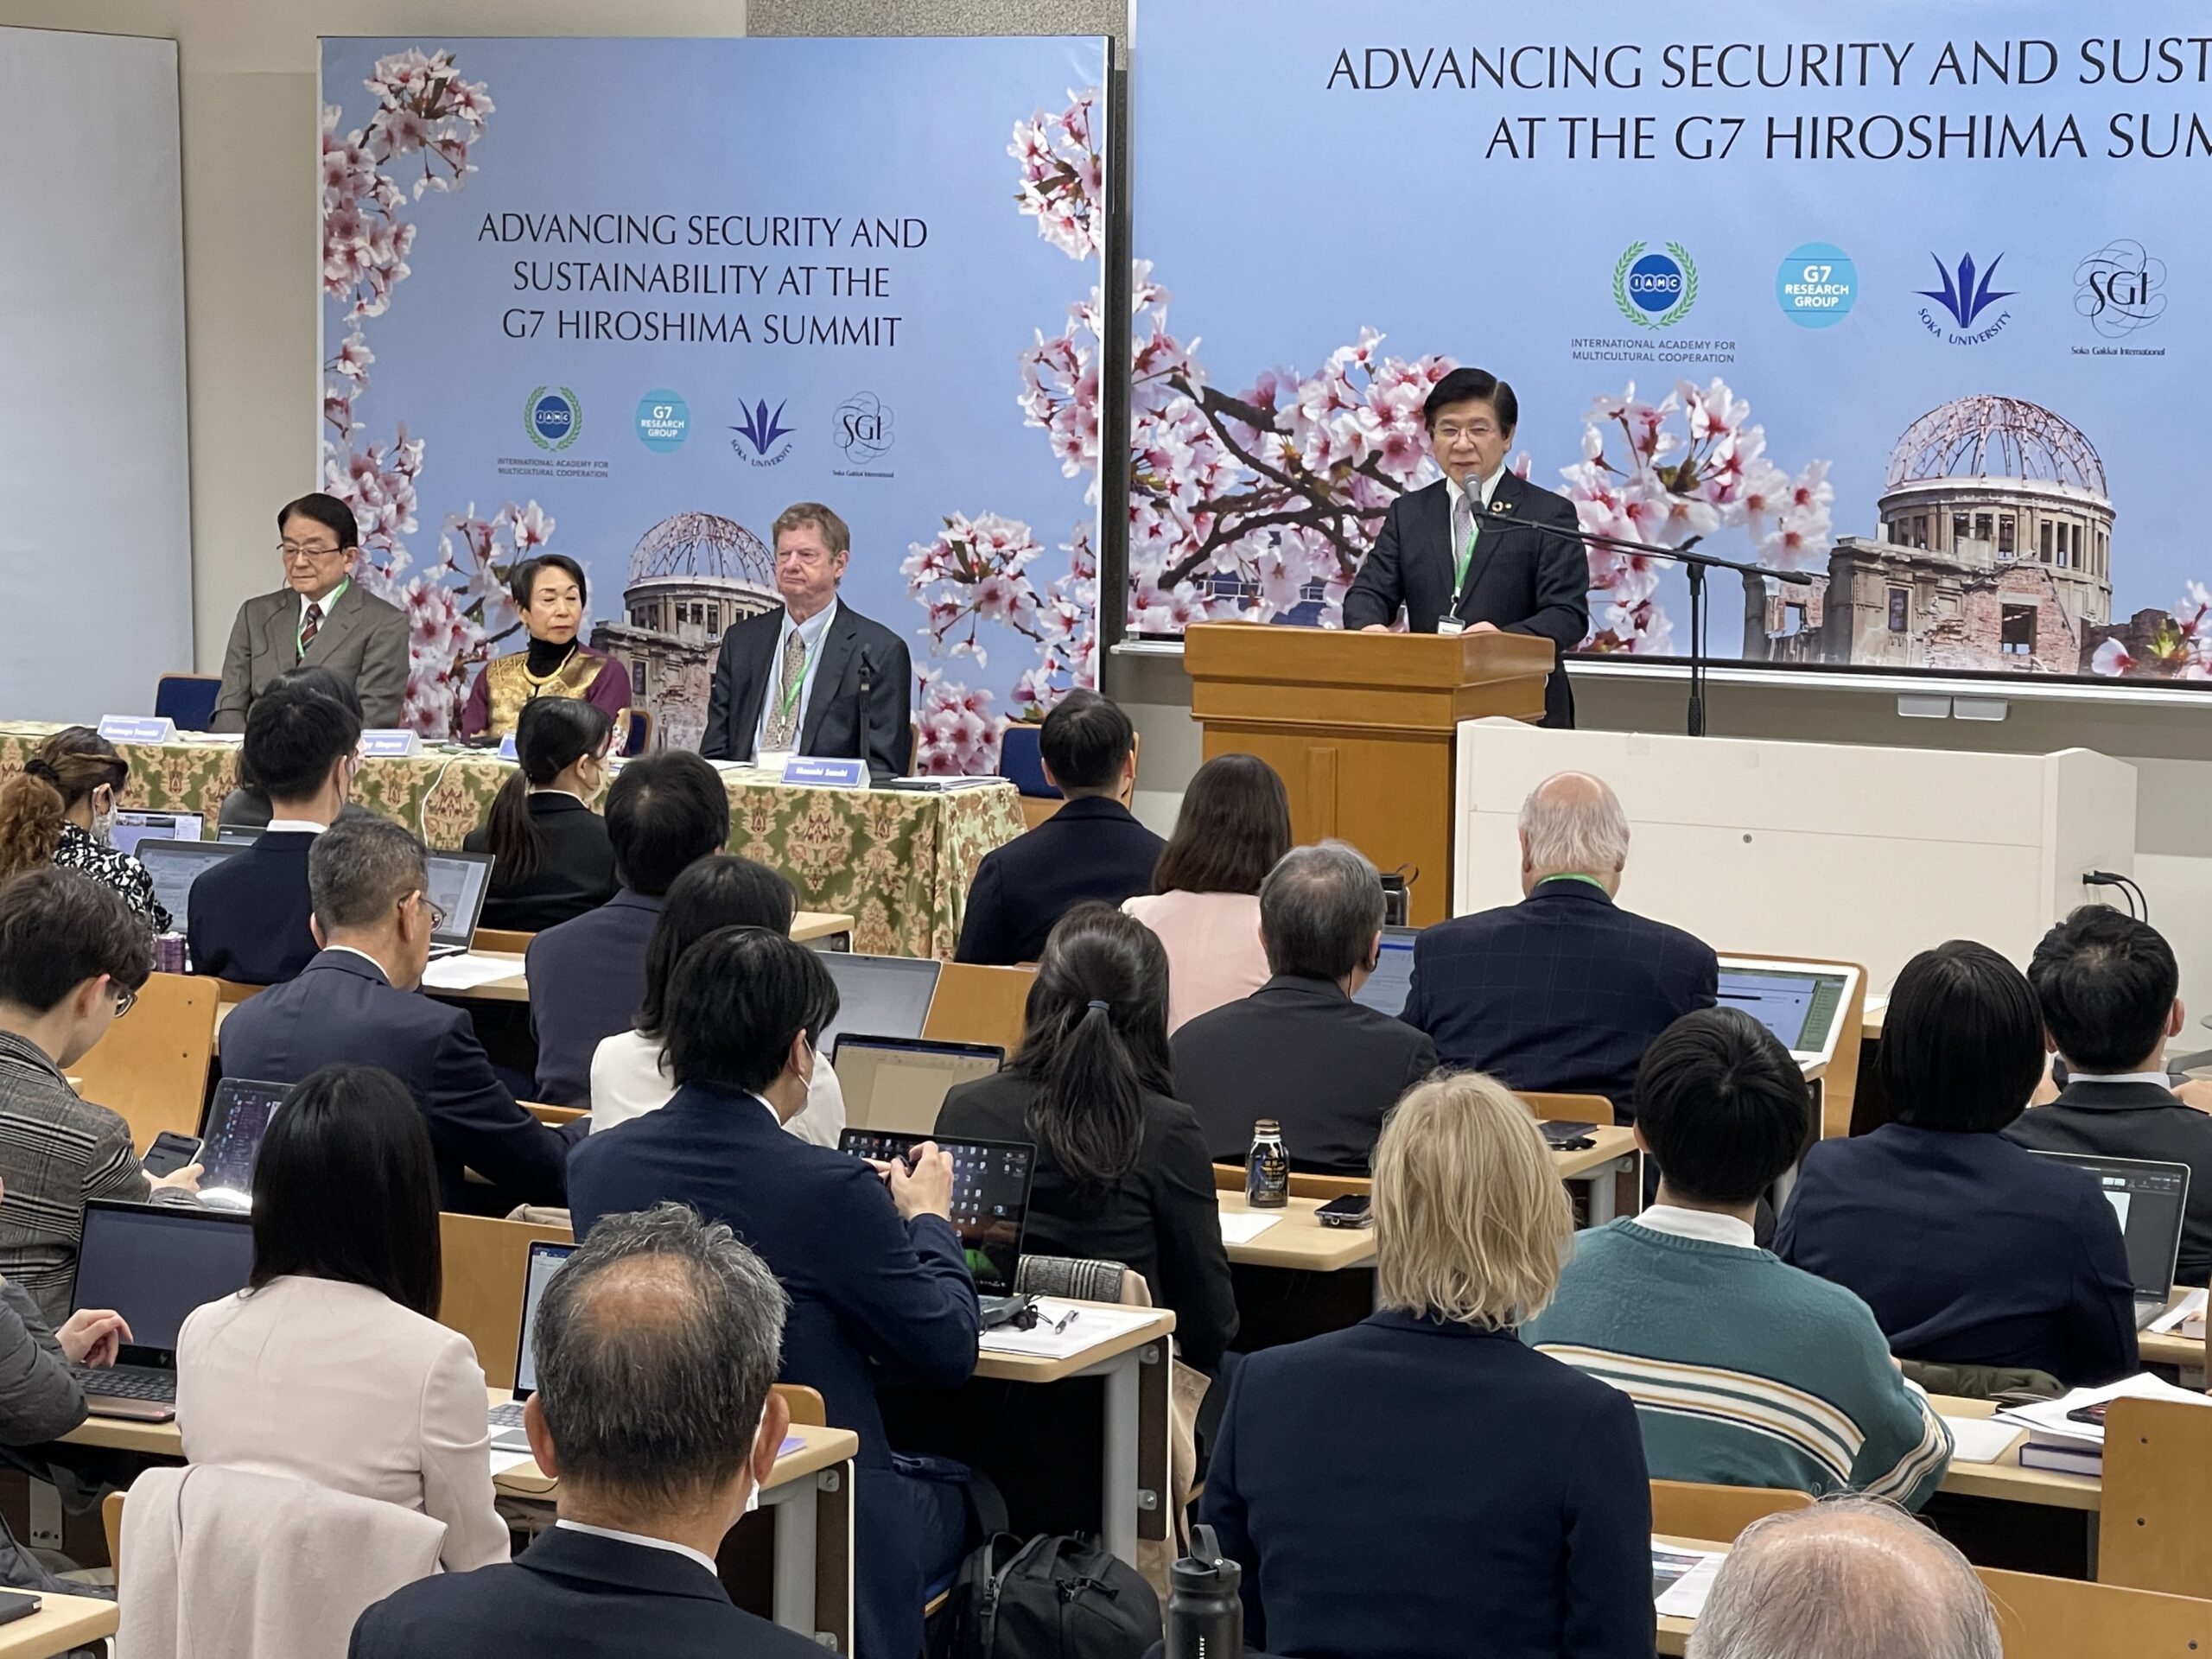 Photo: Soka University President Masashi Suzuki making the welcoming speech at a one-day international conference titled ‘Advancing Security and Sustainability at the G7 Hiroshima Summit’ held at the University on March 29, 2023. (From left to right): Hirotsugu Terasaki, Director General, Peace and Global Issues, Soka Gakkai International (SGI), Audrey Kitagawa, President, International Academy of Multicultural Cooperation (IAMC), and John Kirton, Director, G7 Research Group. Credit: Katsuhiro Asagiri, Multimedia Director of IDN-INPS.